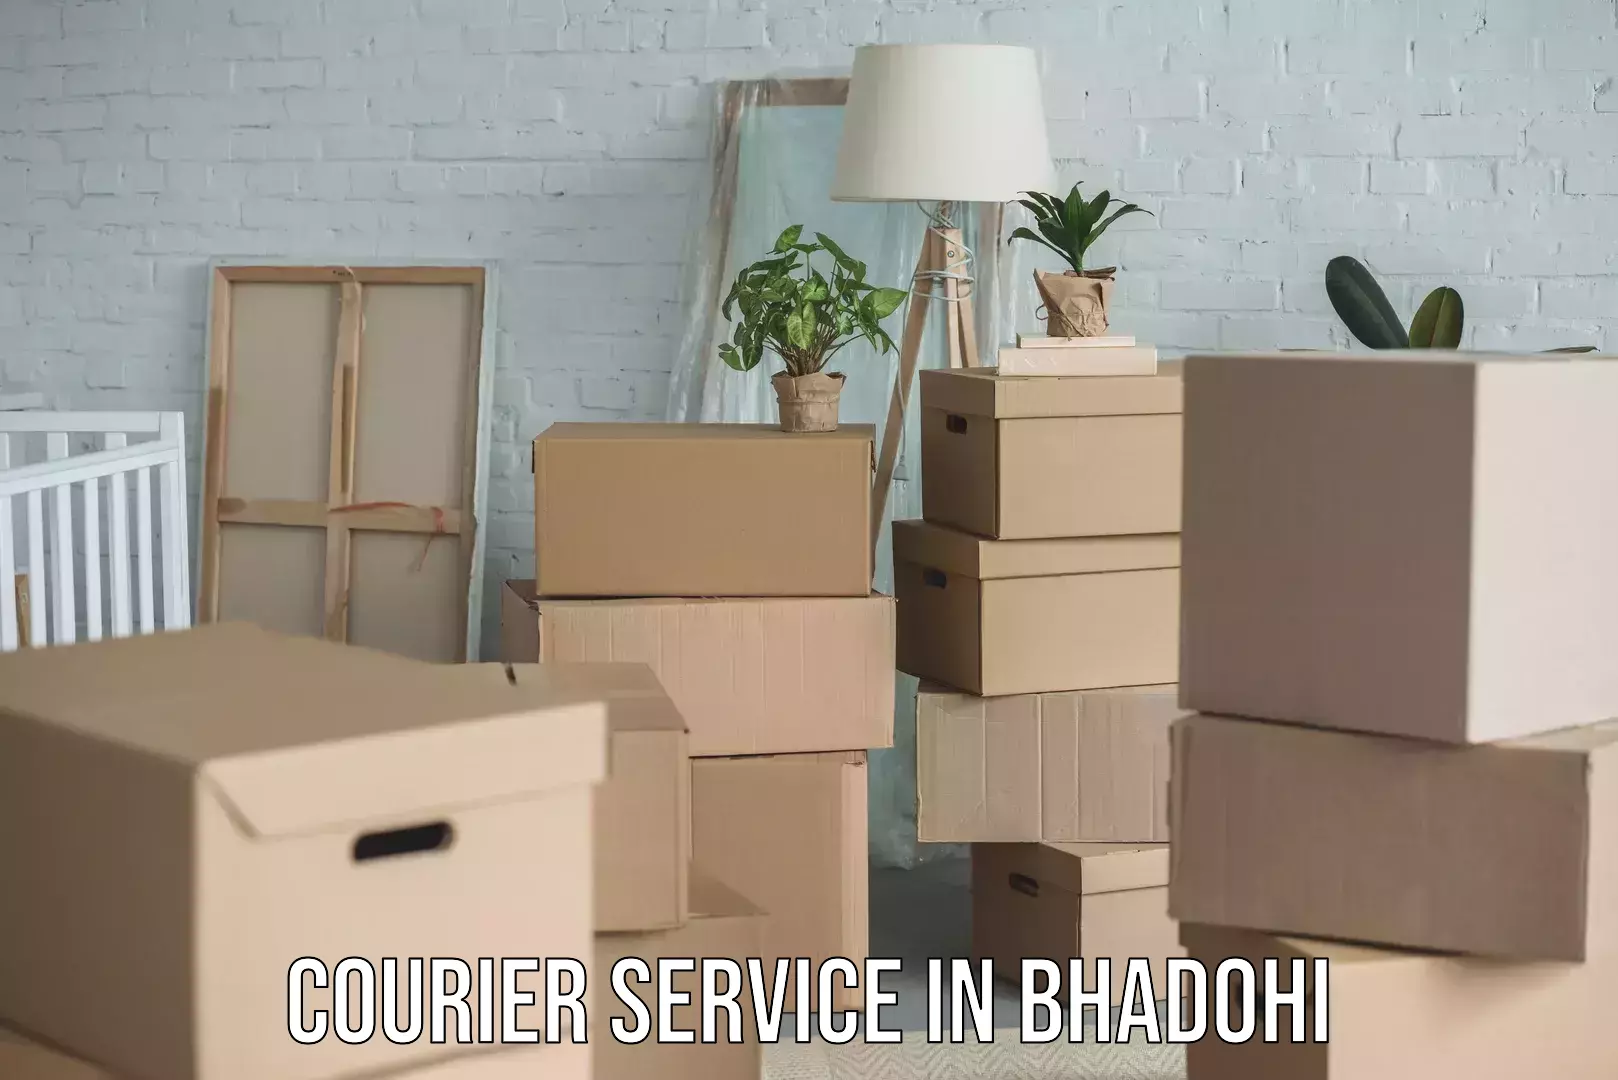 Express logistics service in Bhadohi